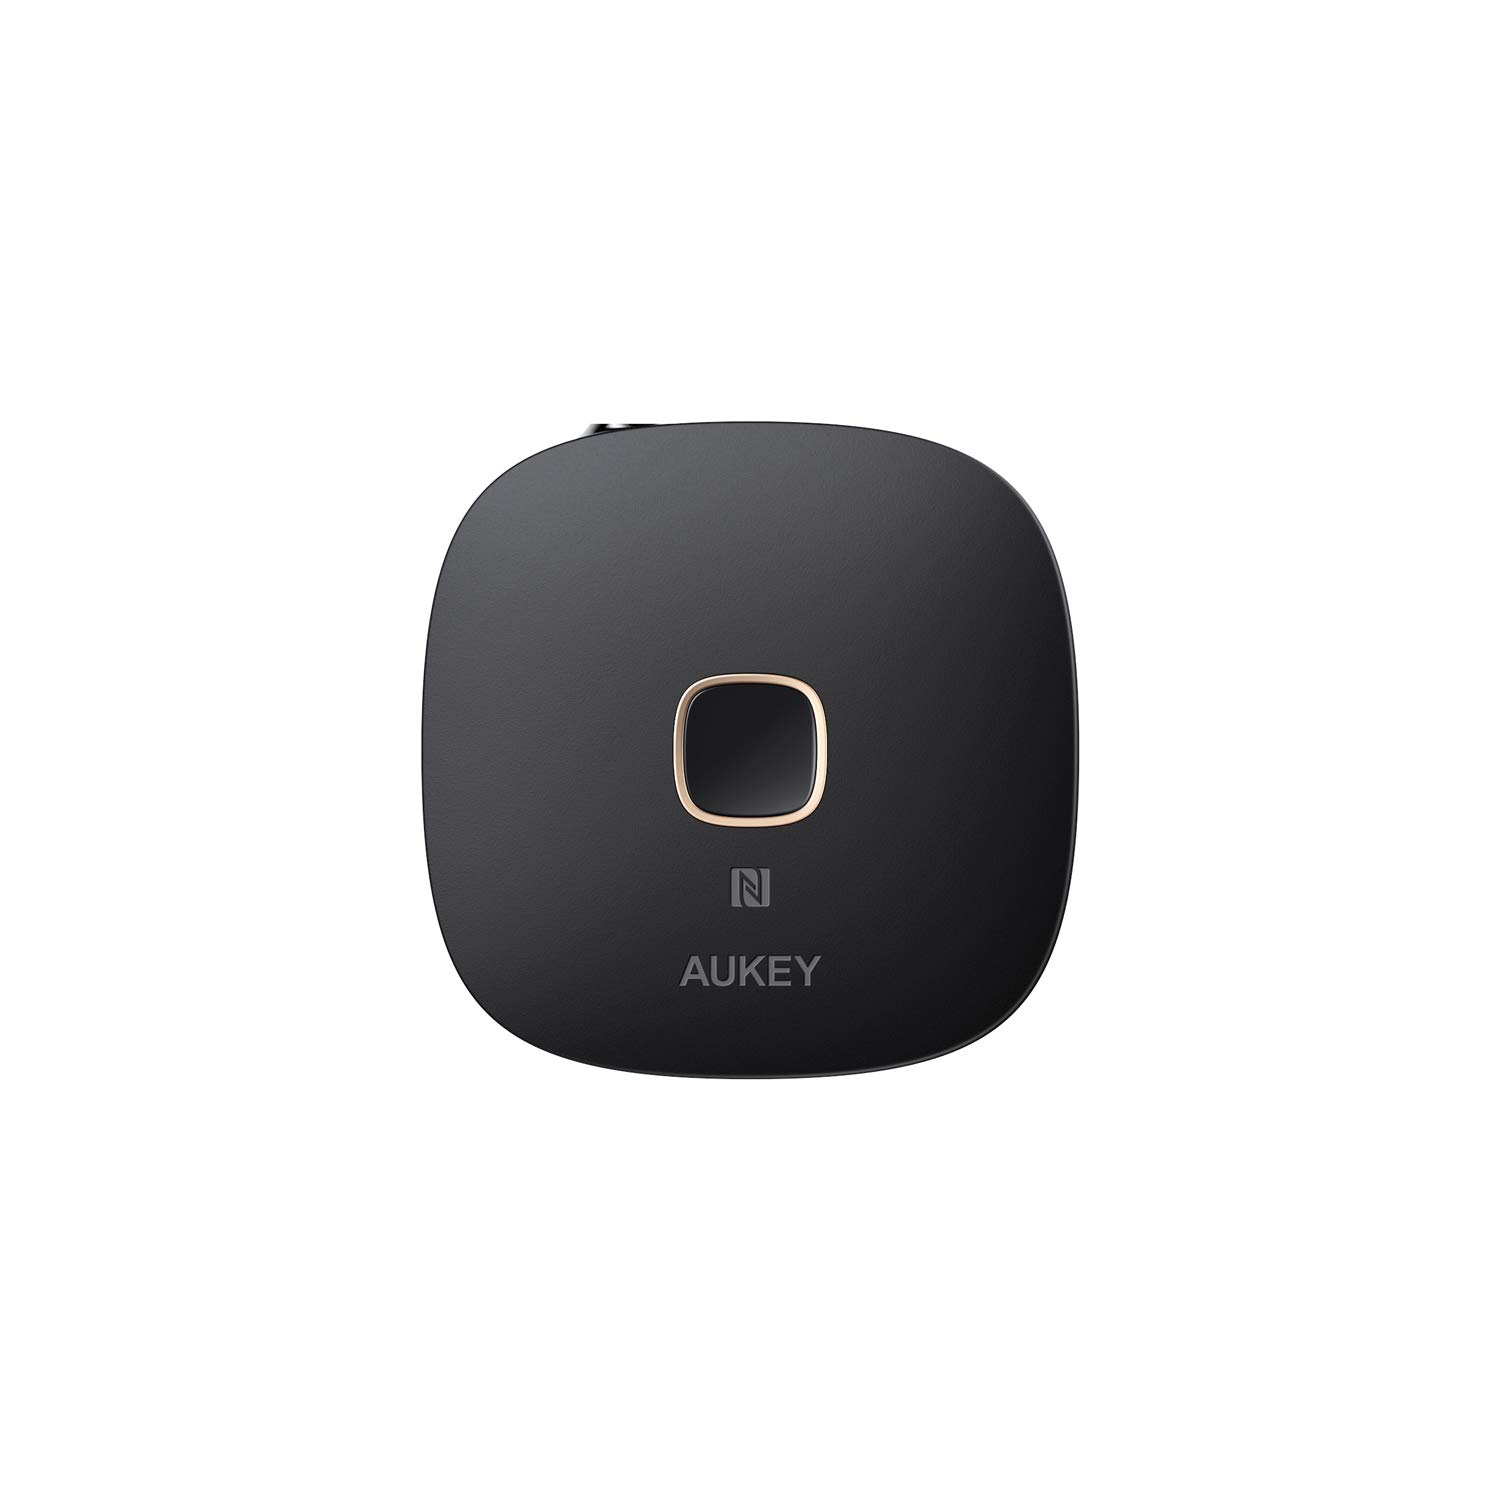 AUKEY Early Prime Day Deals